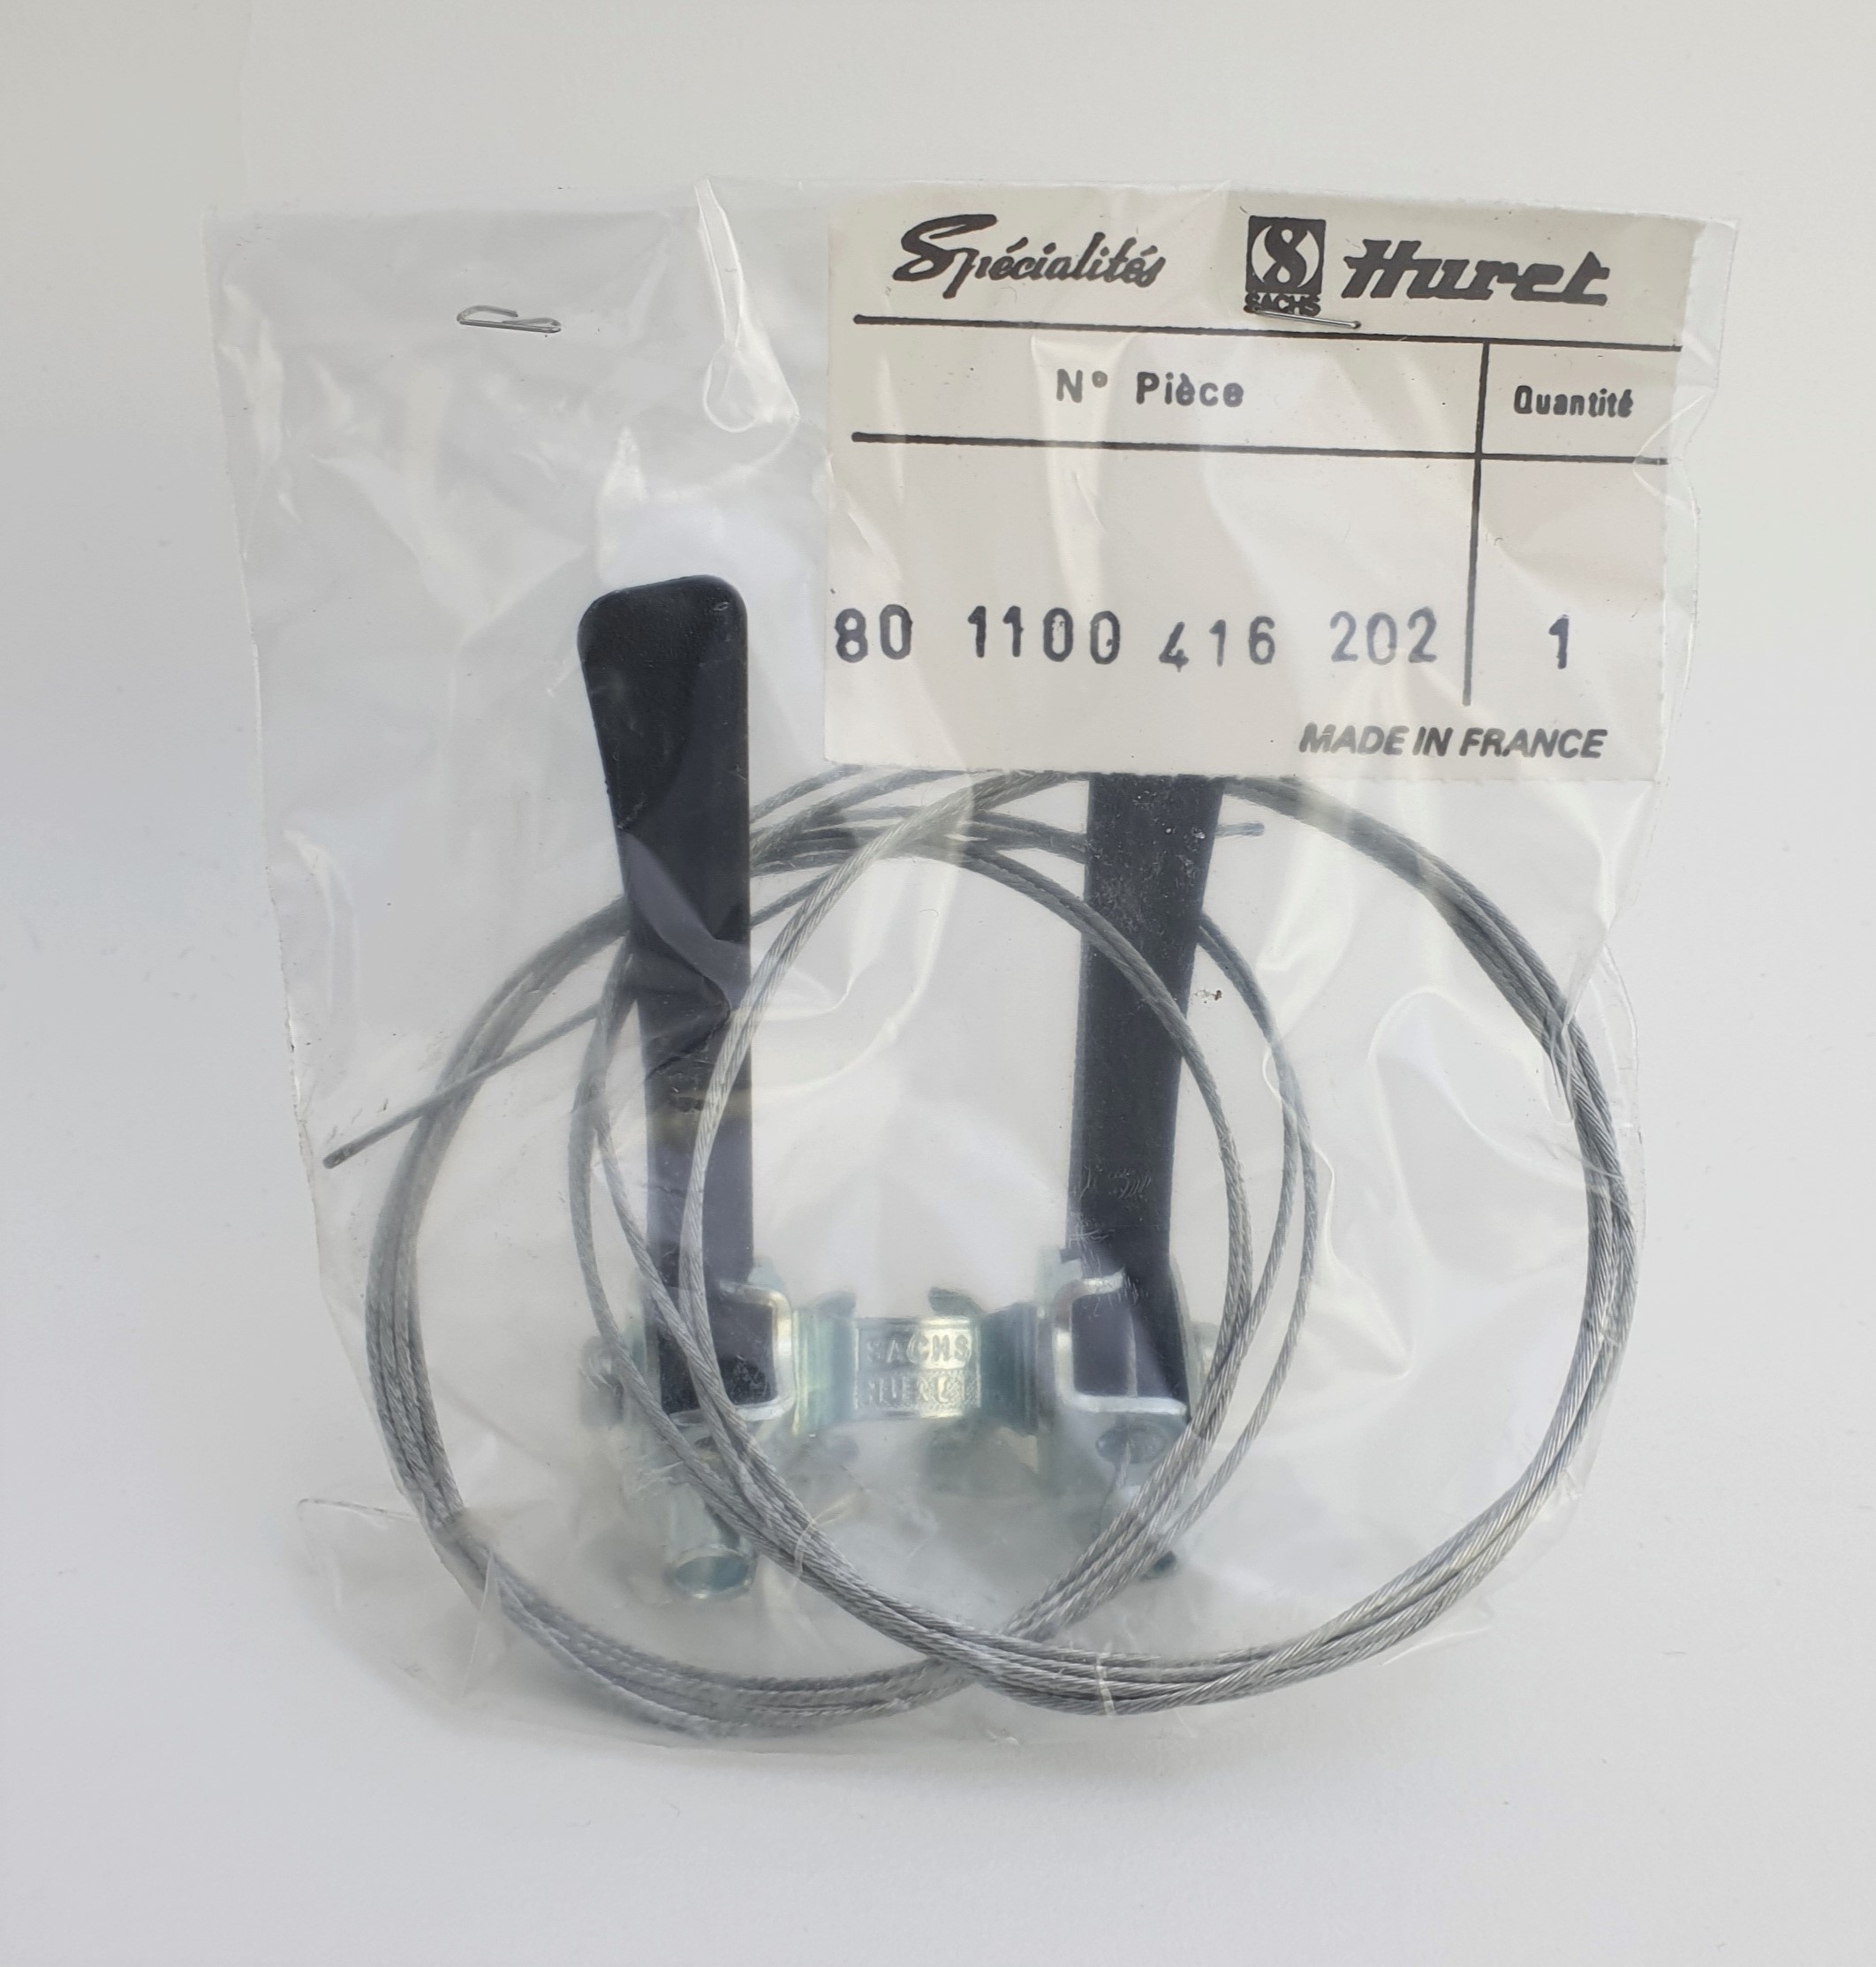 NOS gear lever set from Specialites Sachs Huret for mounting on handlebar stem